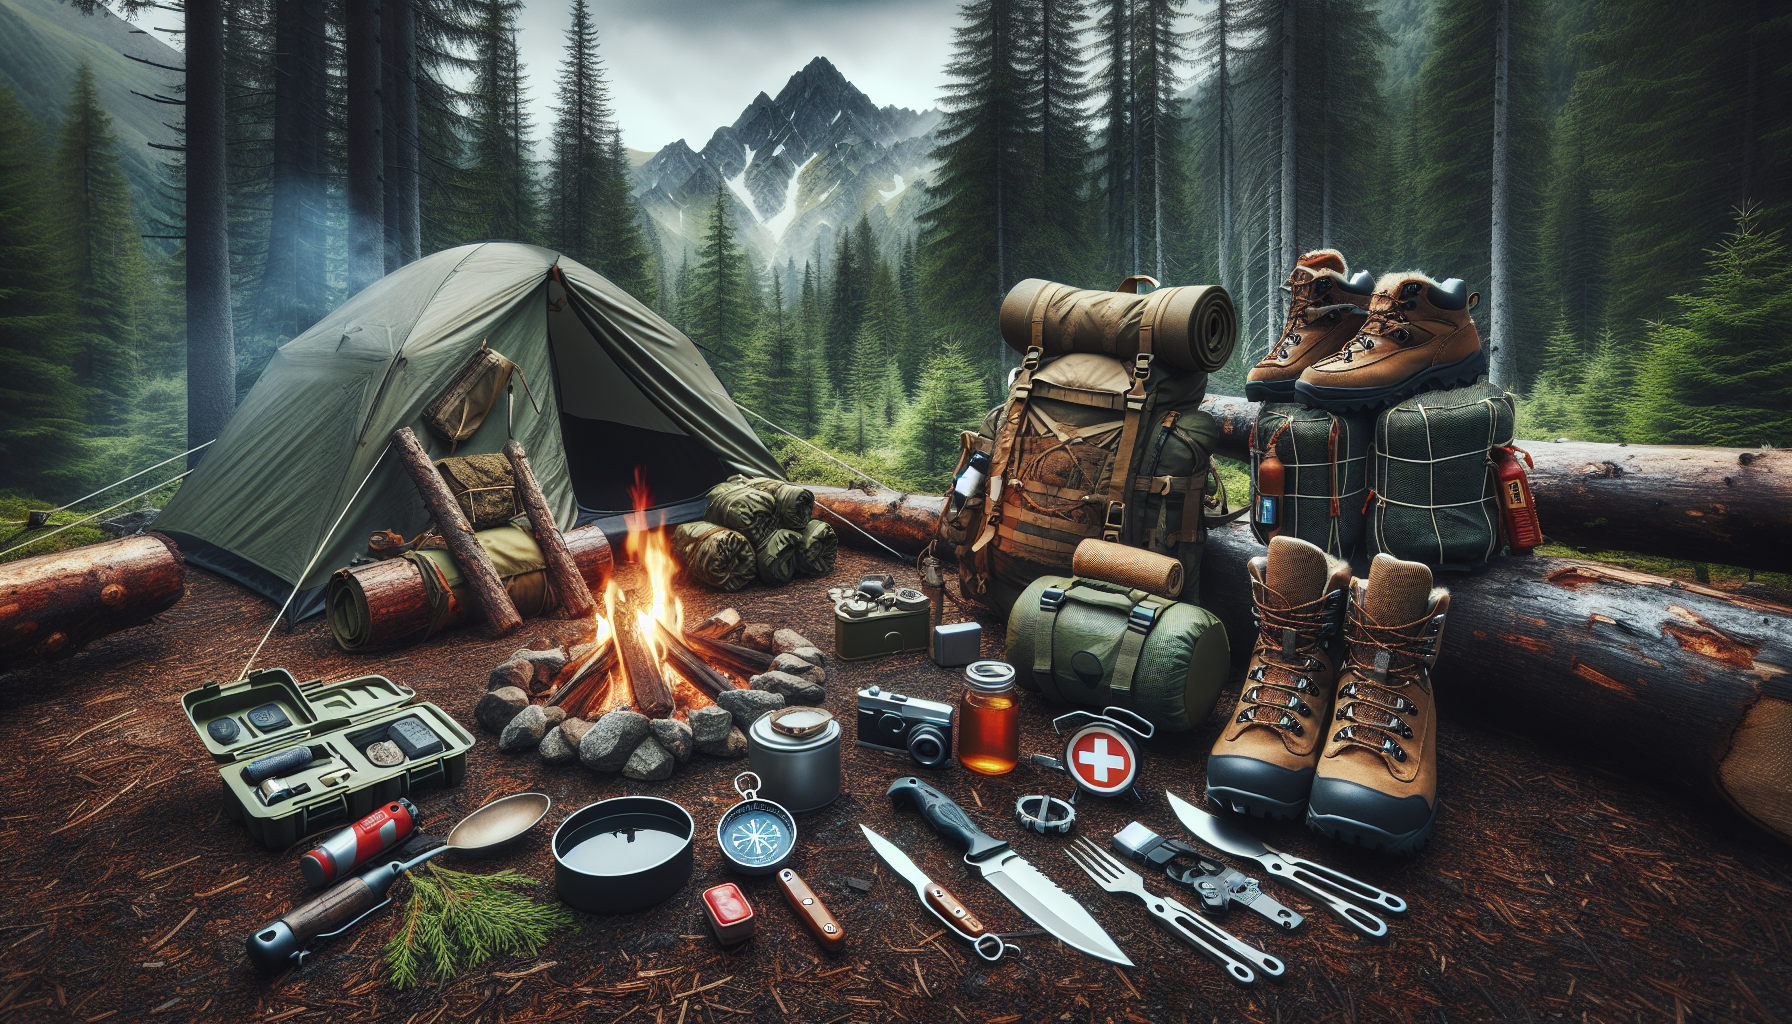 Outdoor Survival Gear: A Guide For Camping In The Wilderness